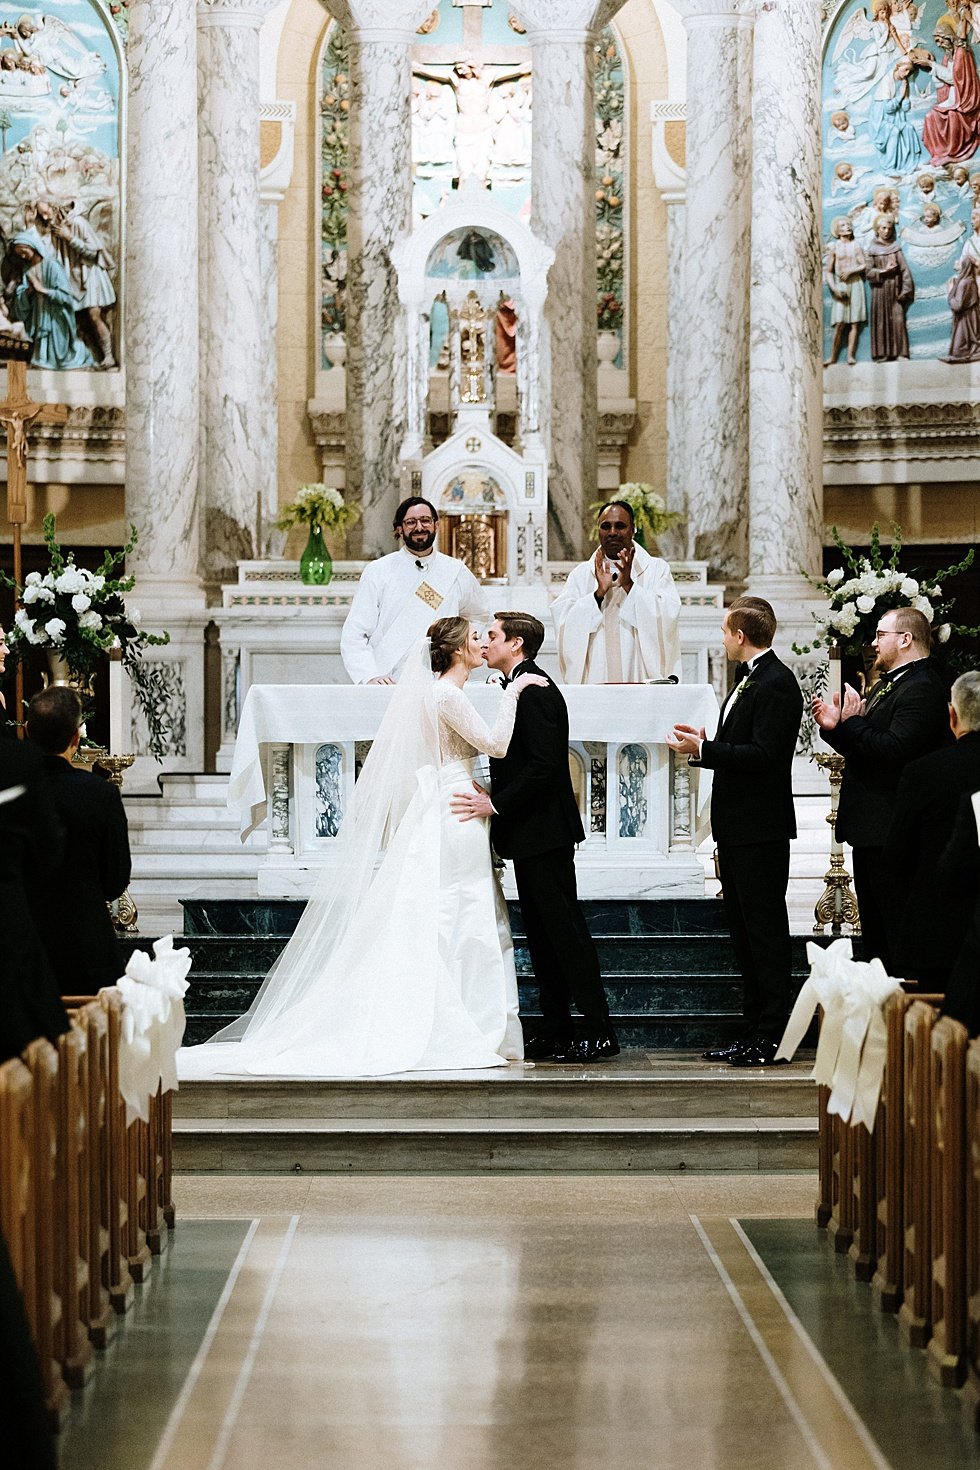  Wedding ceremony at St Agnes catholic church. Lauren and Adam's winter wedding at St Agnes Catholic church and the Frazier History Museum. 